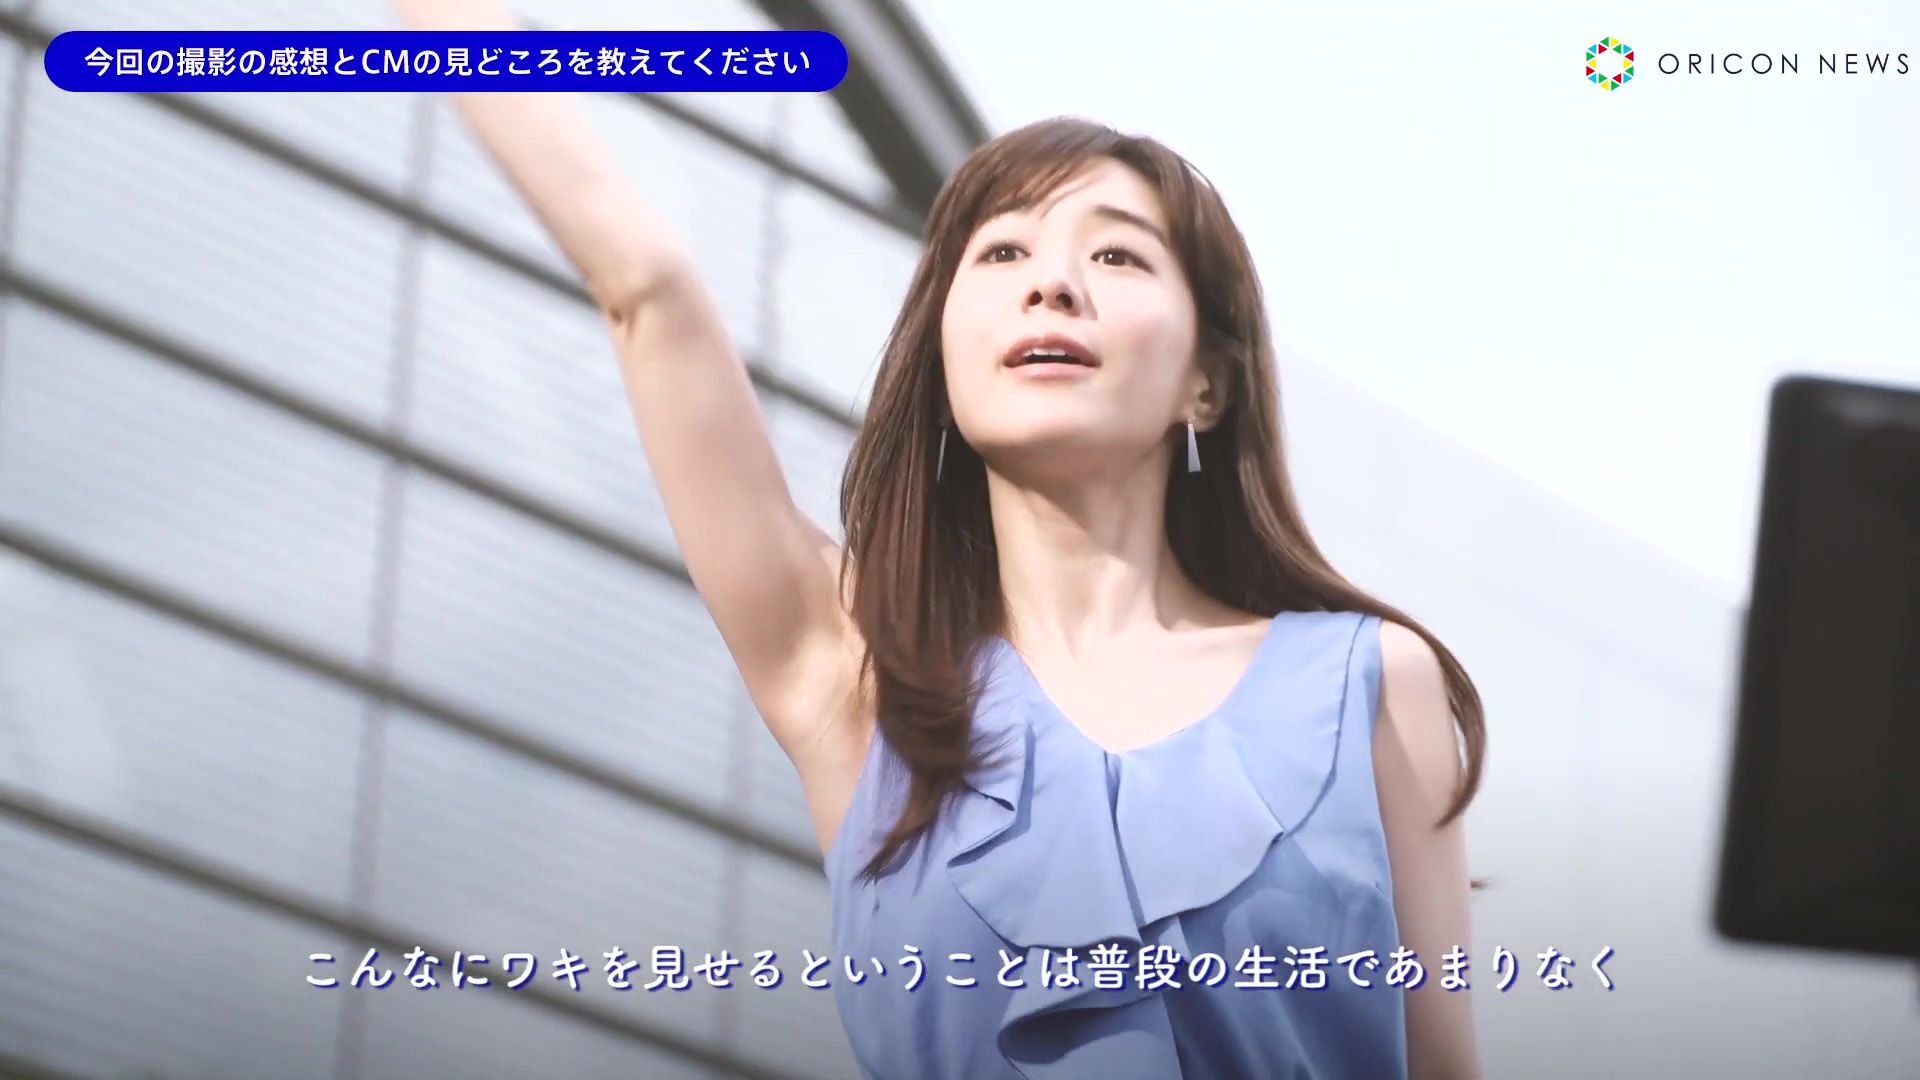 [Image] I'll show you the eroticism of Minami Tanaka 33 years old! and appeal does not stop wwwwww 4